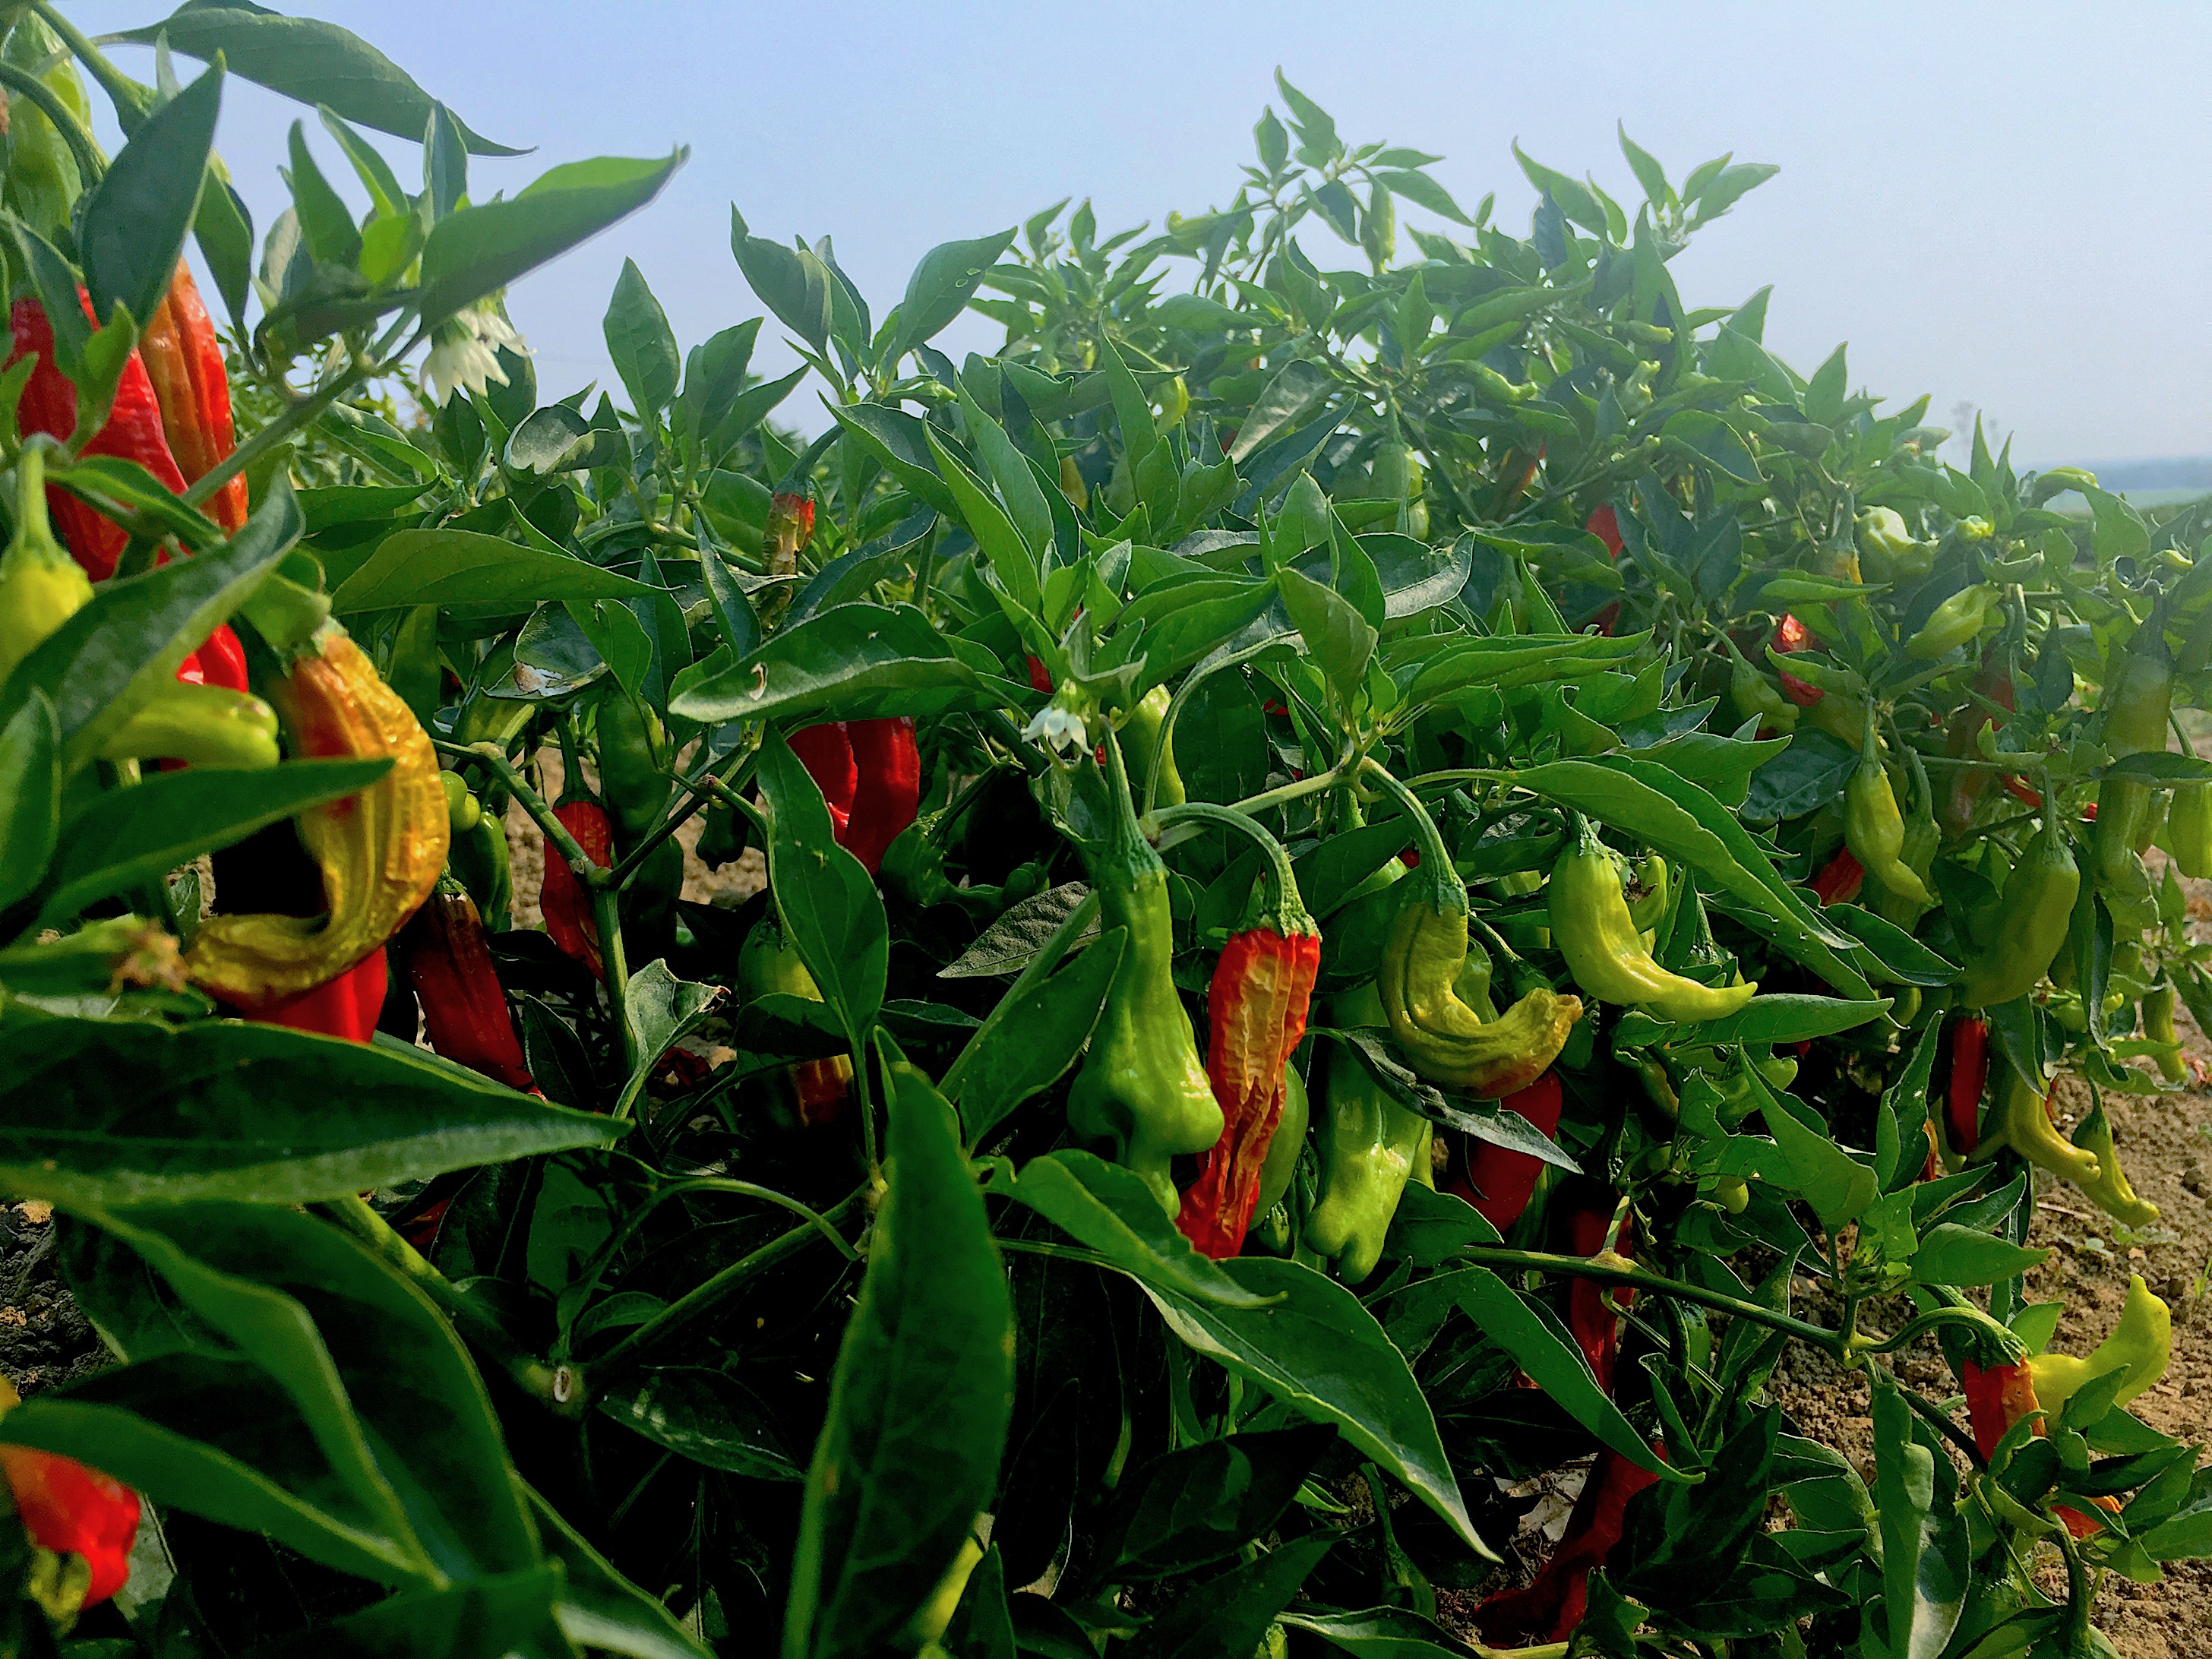 The shishito pepper forest is something to behold.